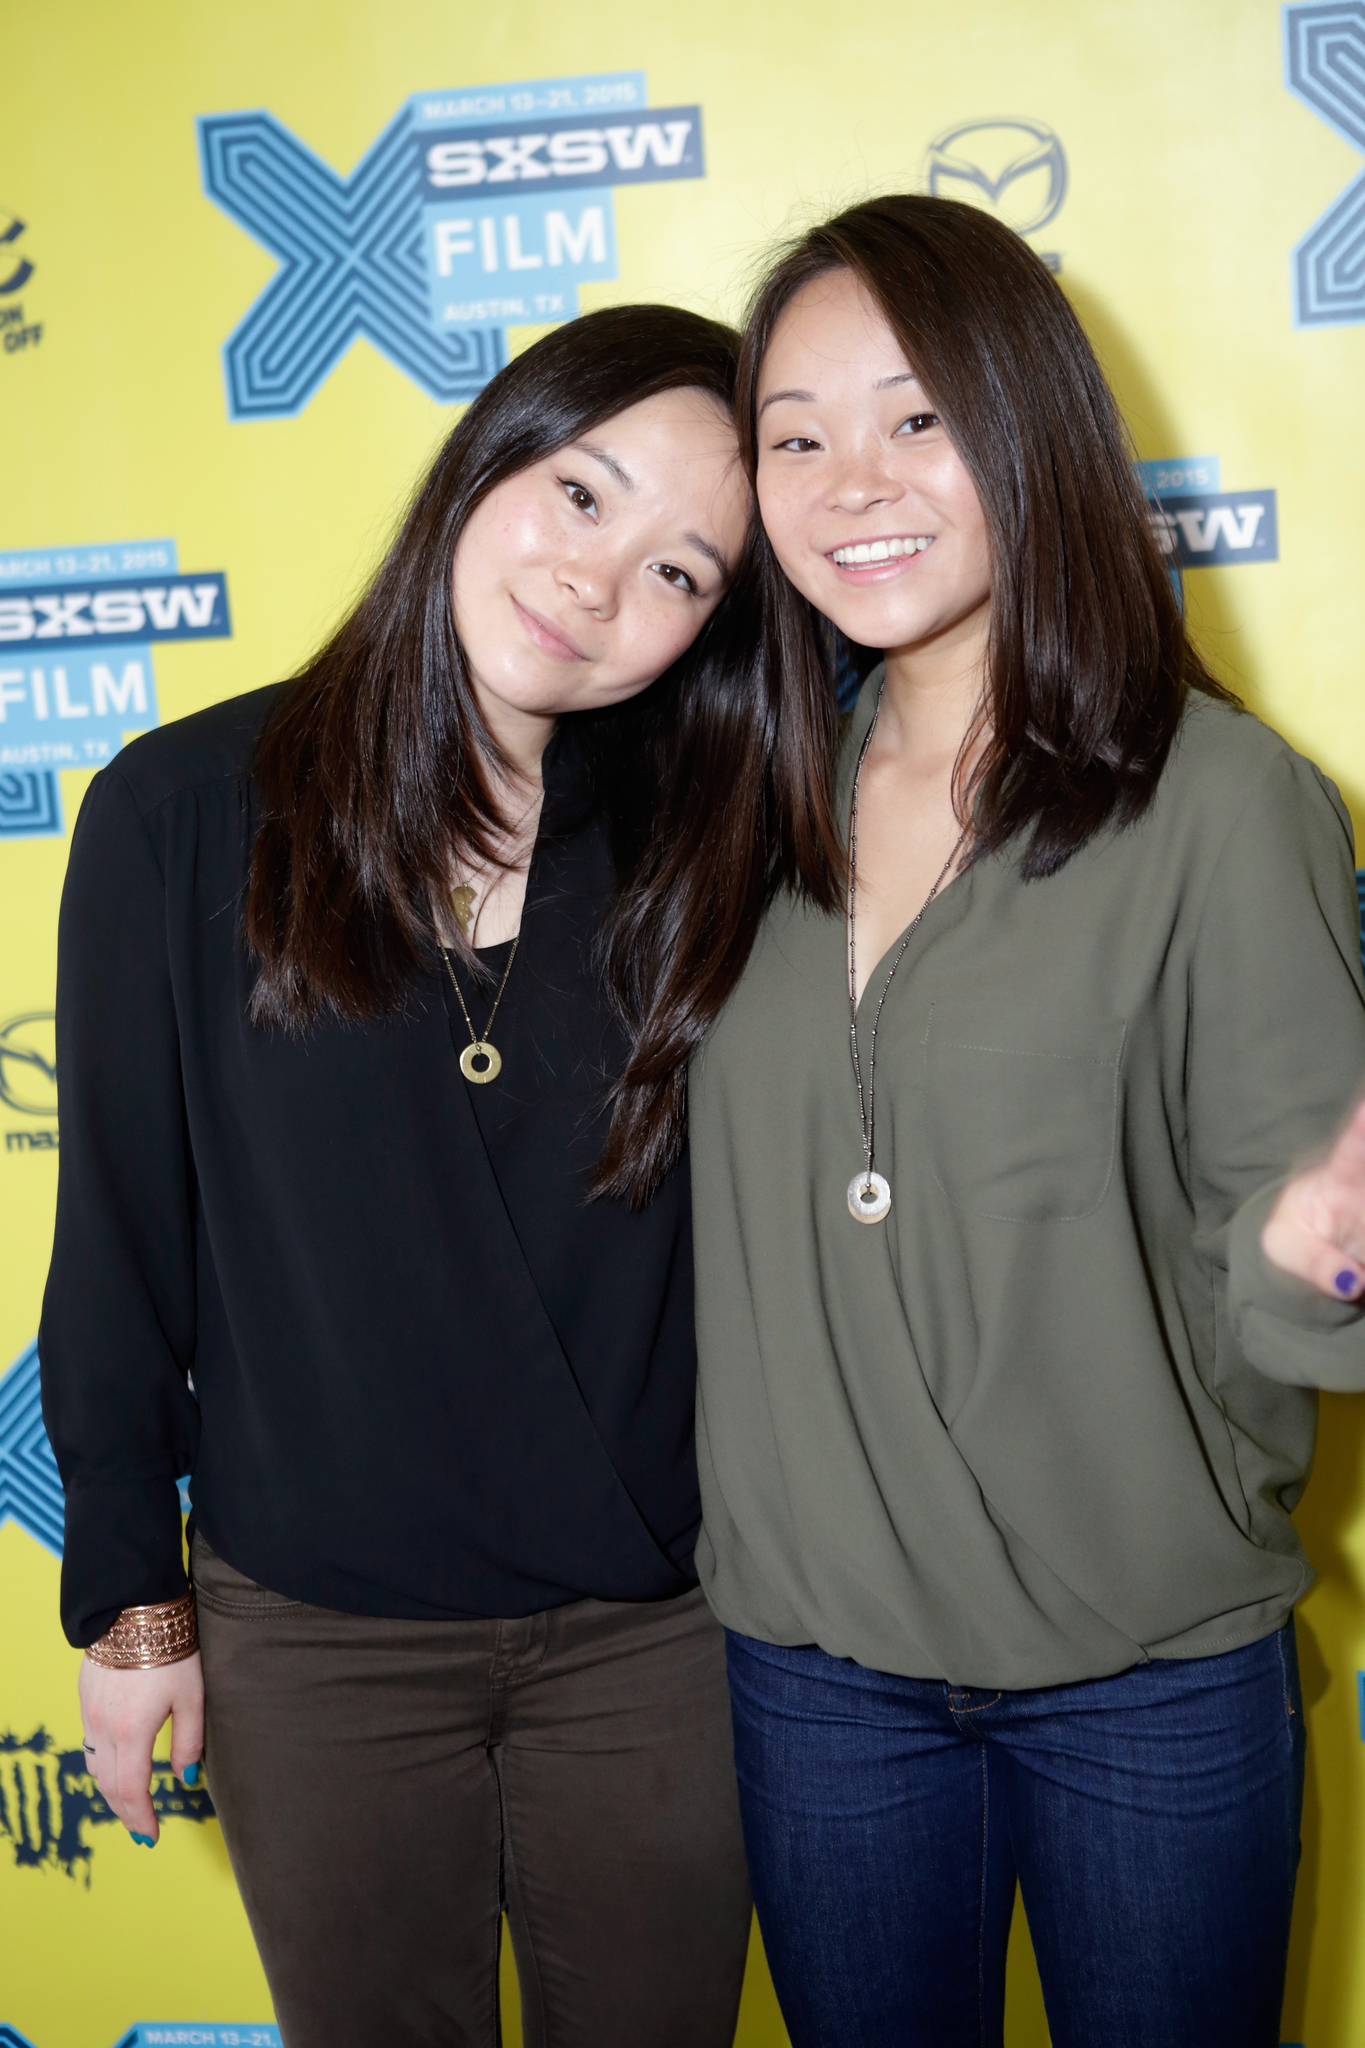 Samantha Futerman and Anais Bordier at event of Twinsters (2015)